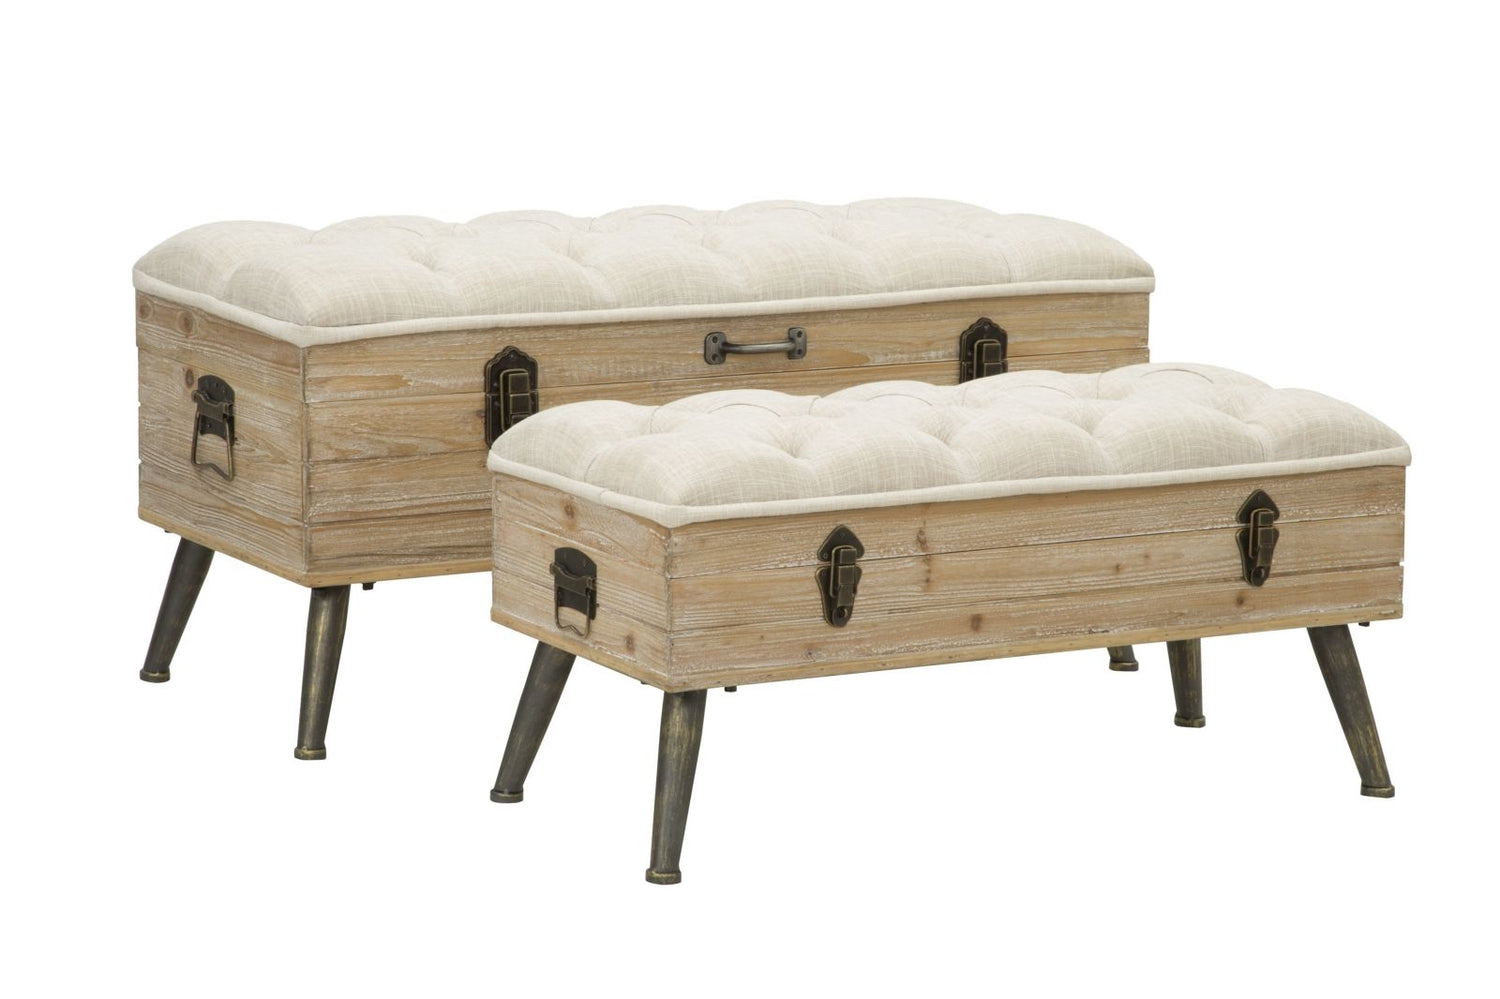 Buy Set of 2 benches with storage space upholstered with fabric and metal legs, Tirana Couple Cream, l102xW43.5xH49.5 cm / l82xW36xH37 cm online, best price, free delivery